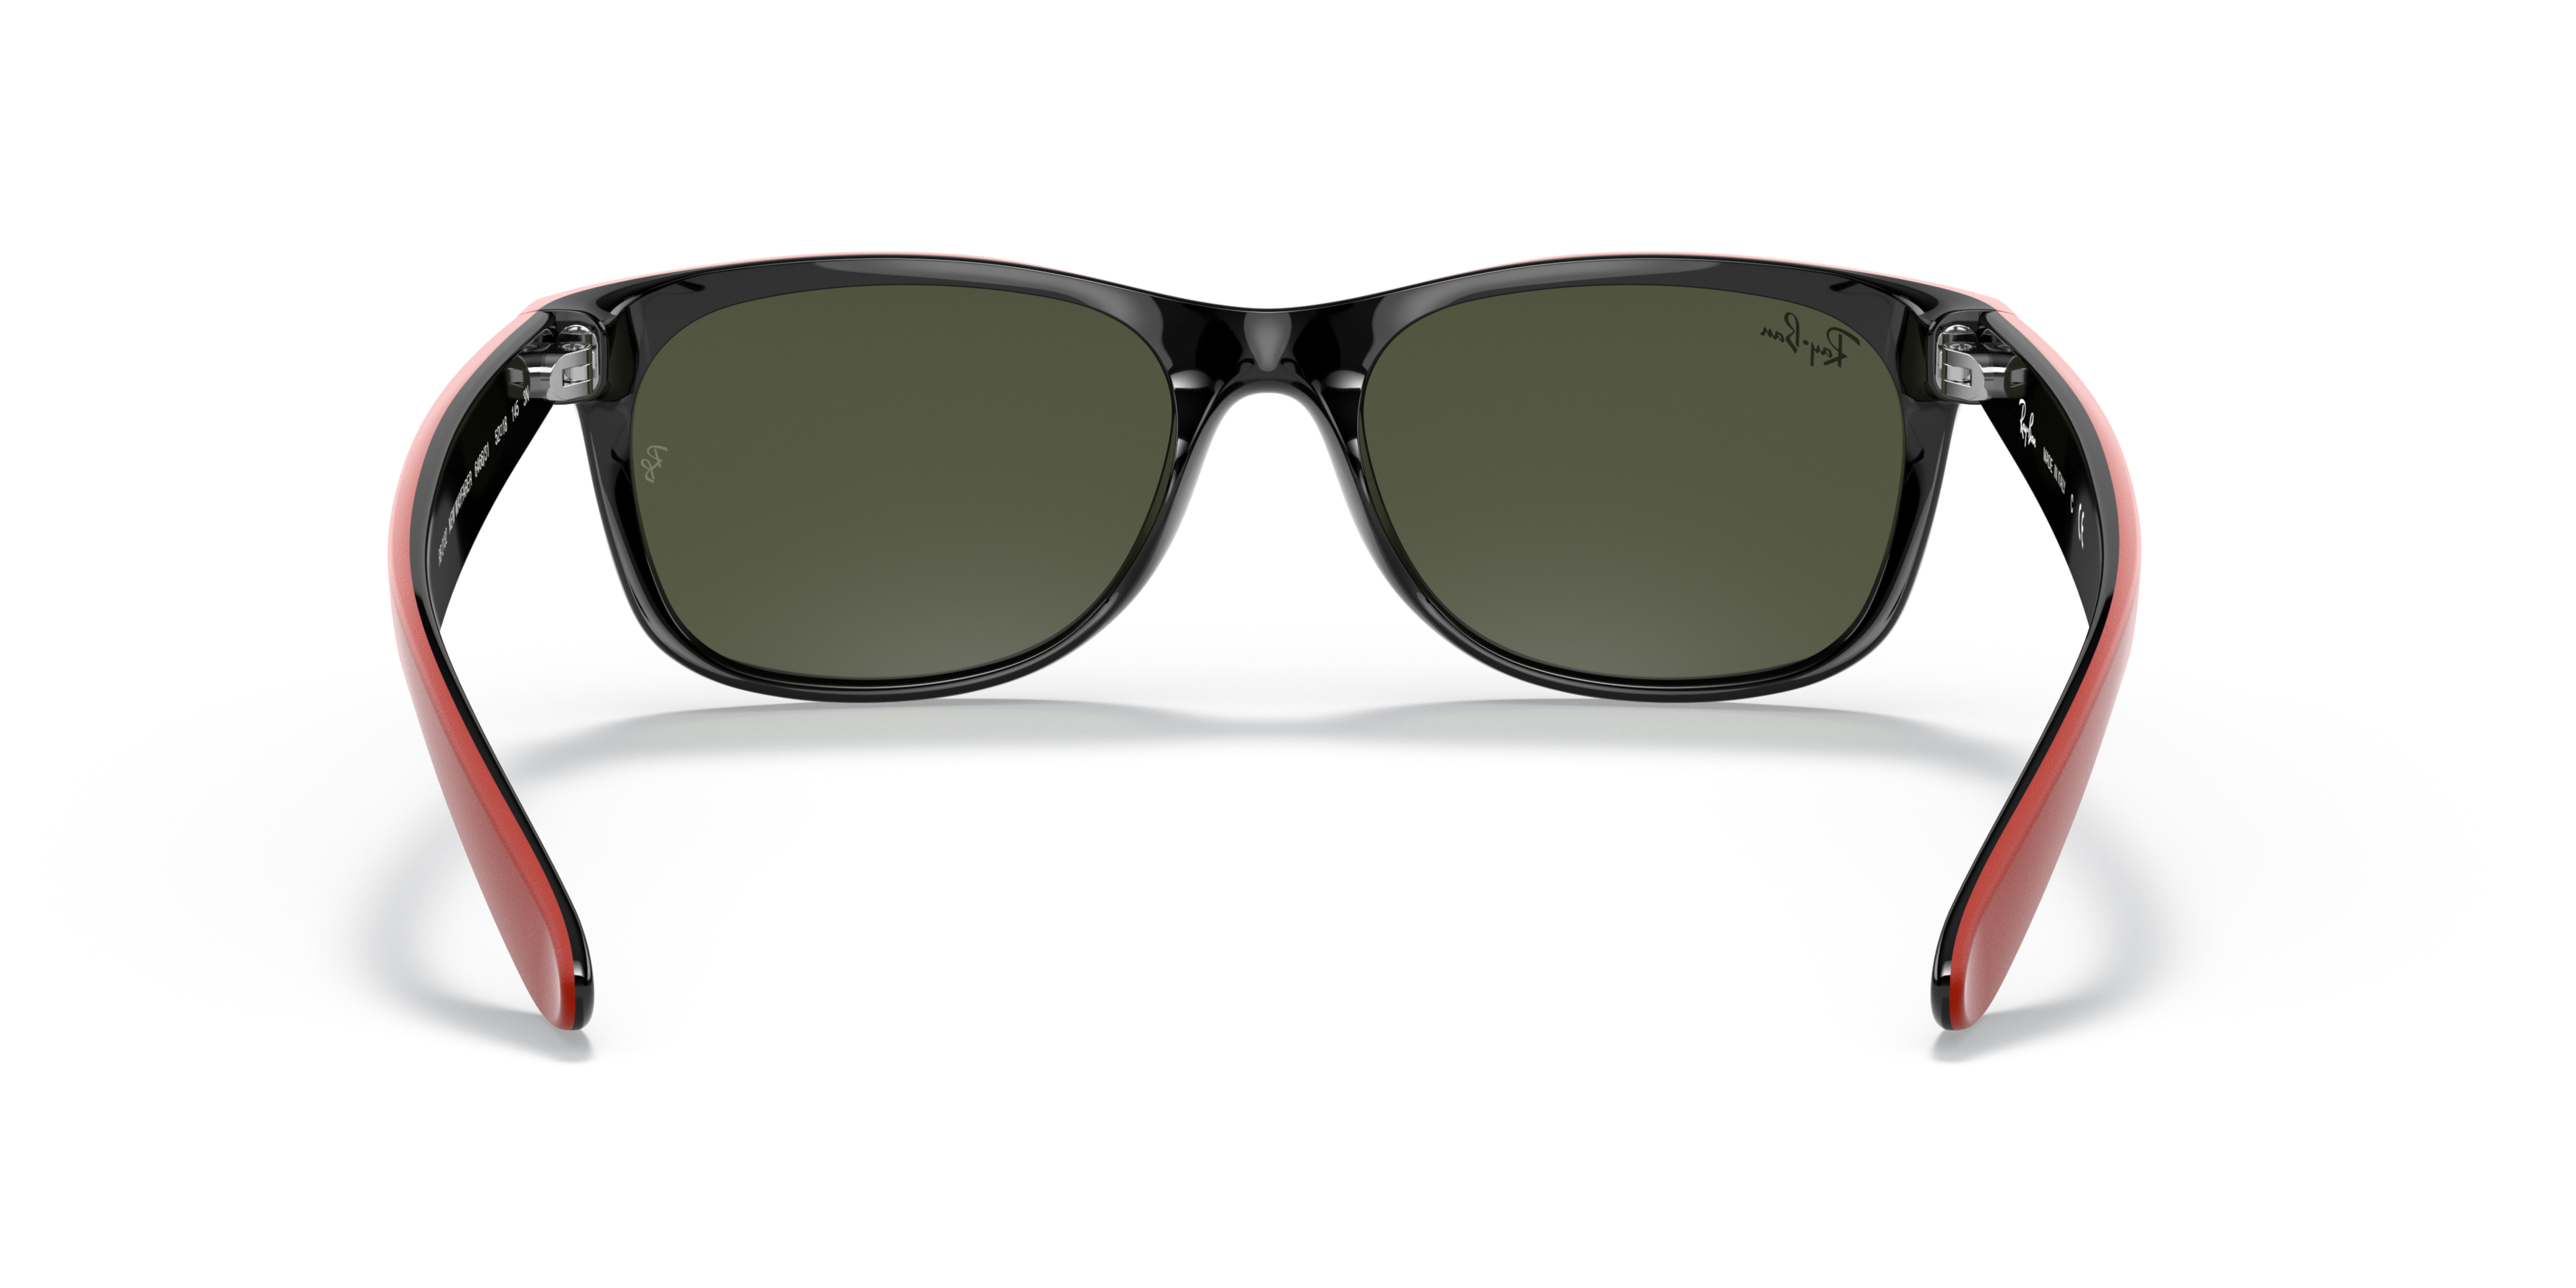 [products.image.detail02] Ray-Ban New Wayfarer Color Mix RB2132 646631